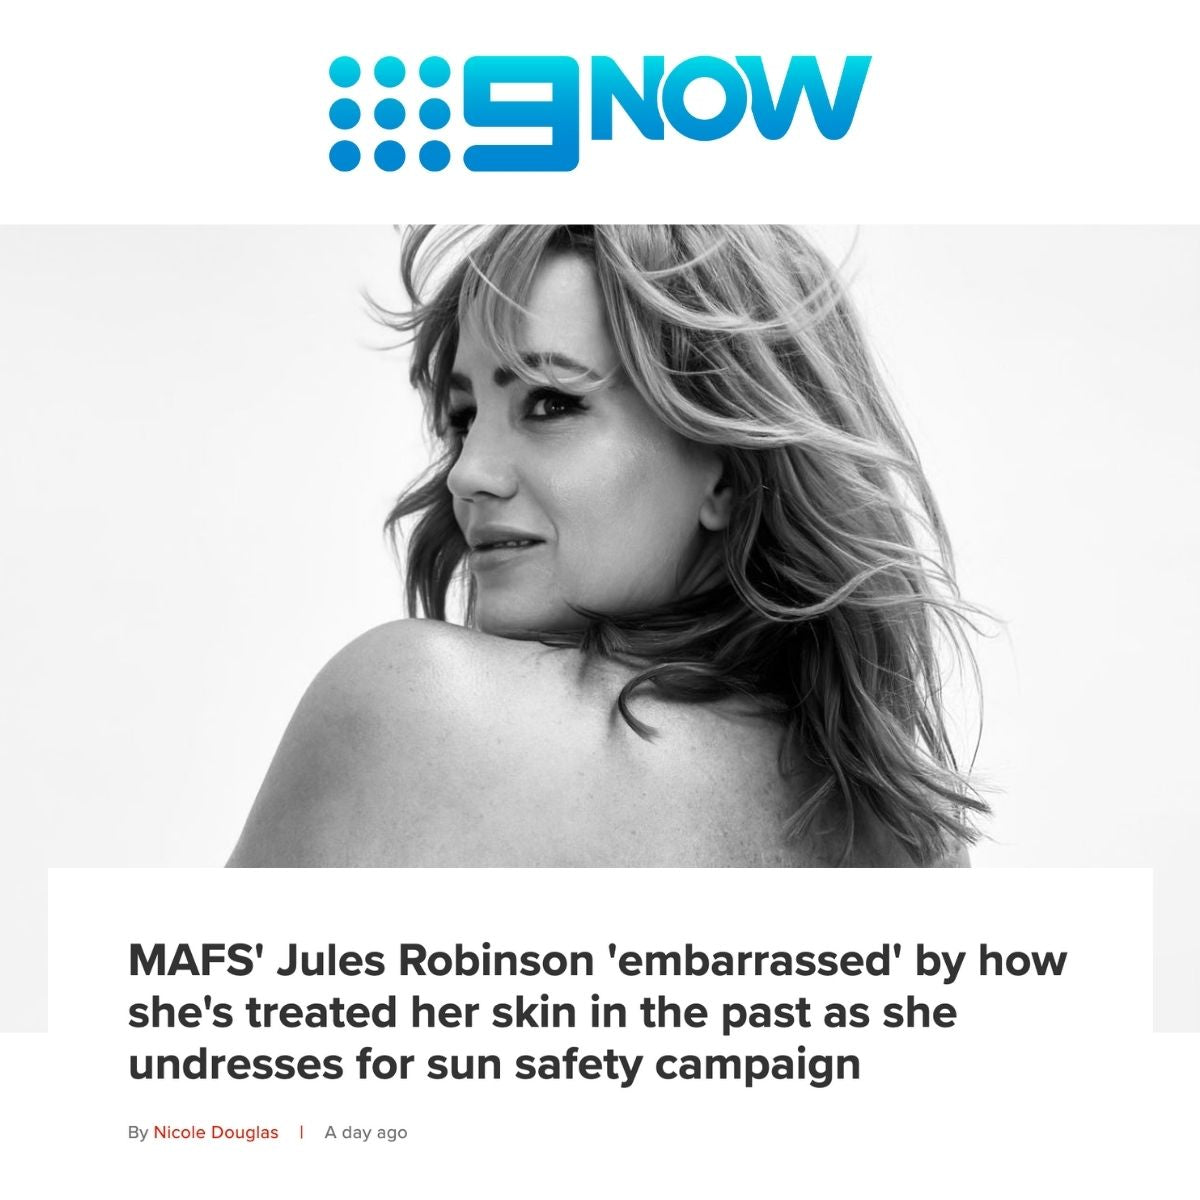 MAFS' Jules Robinson 'embarrassed' by how she's treated her skin in the past as she undresses for sun safety campaign